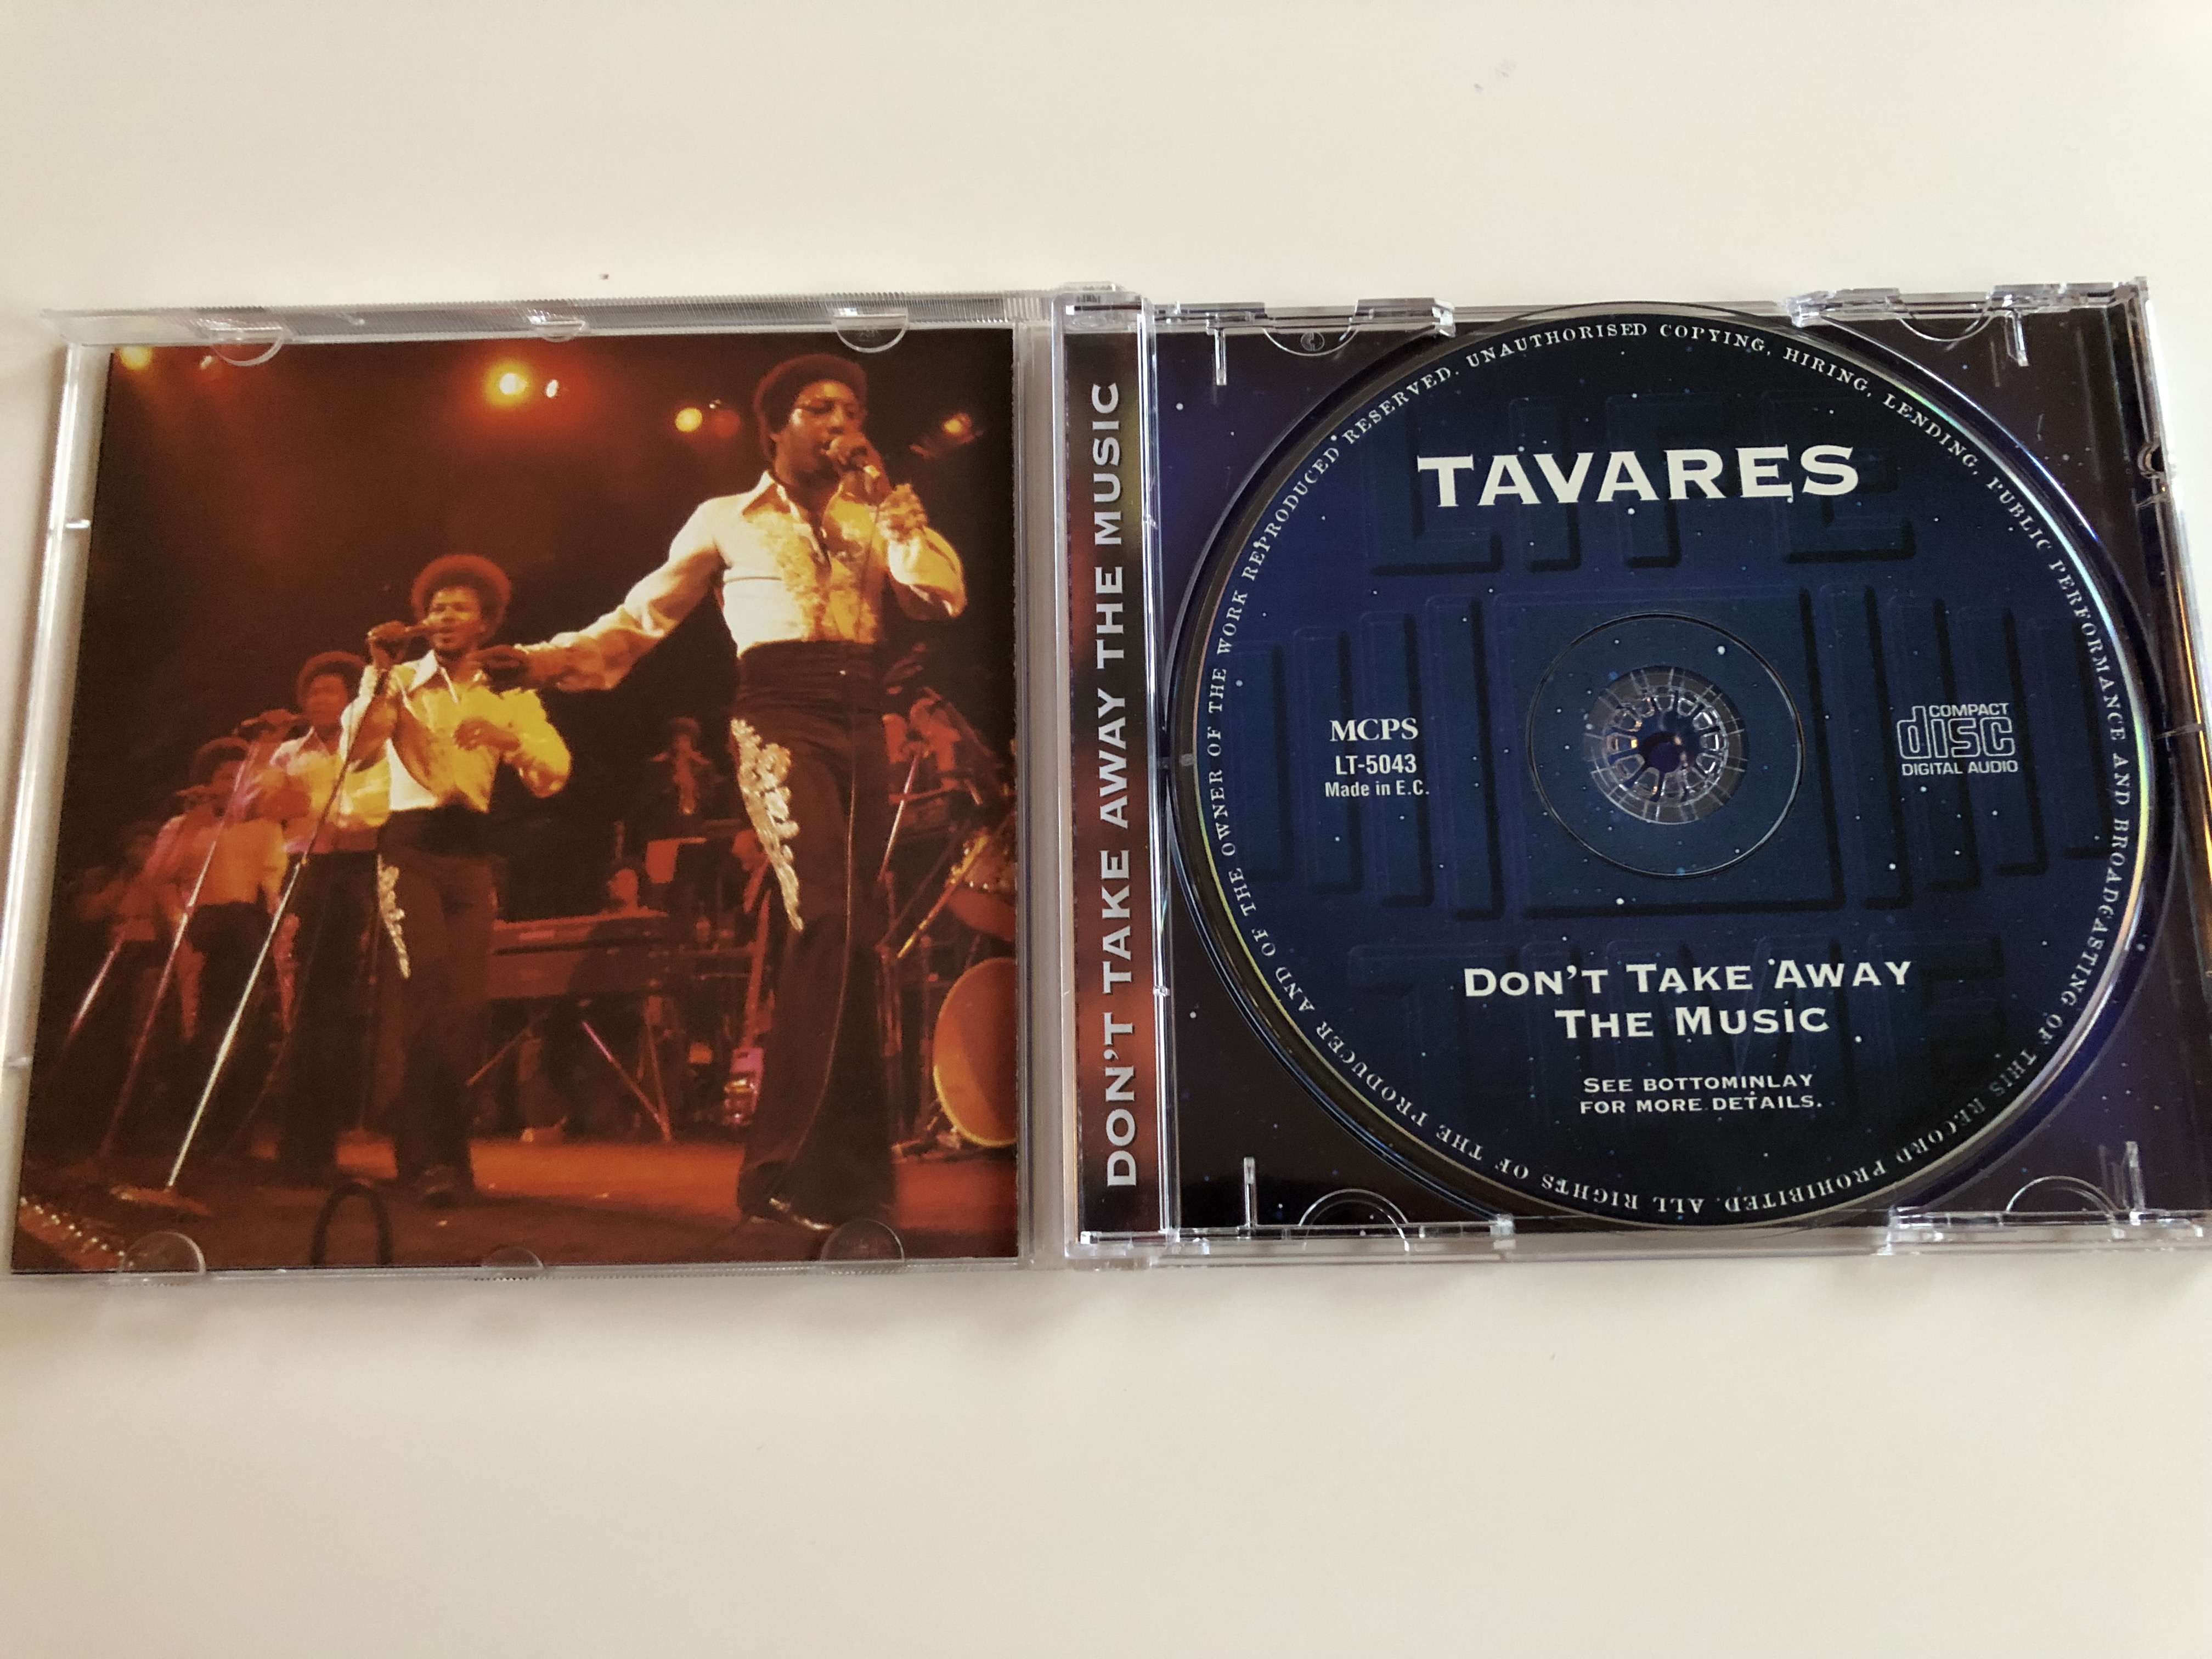 tavares-don-t-take-away-the-music-it-only-takes-a-minute-more-than-a-woman-heaven-must-be-missing-an-angel-whodunit-life-time-audio-cd-lt-5043-2-.jpg